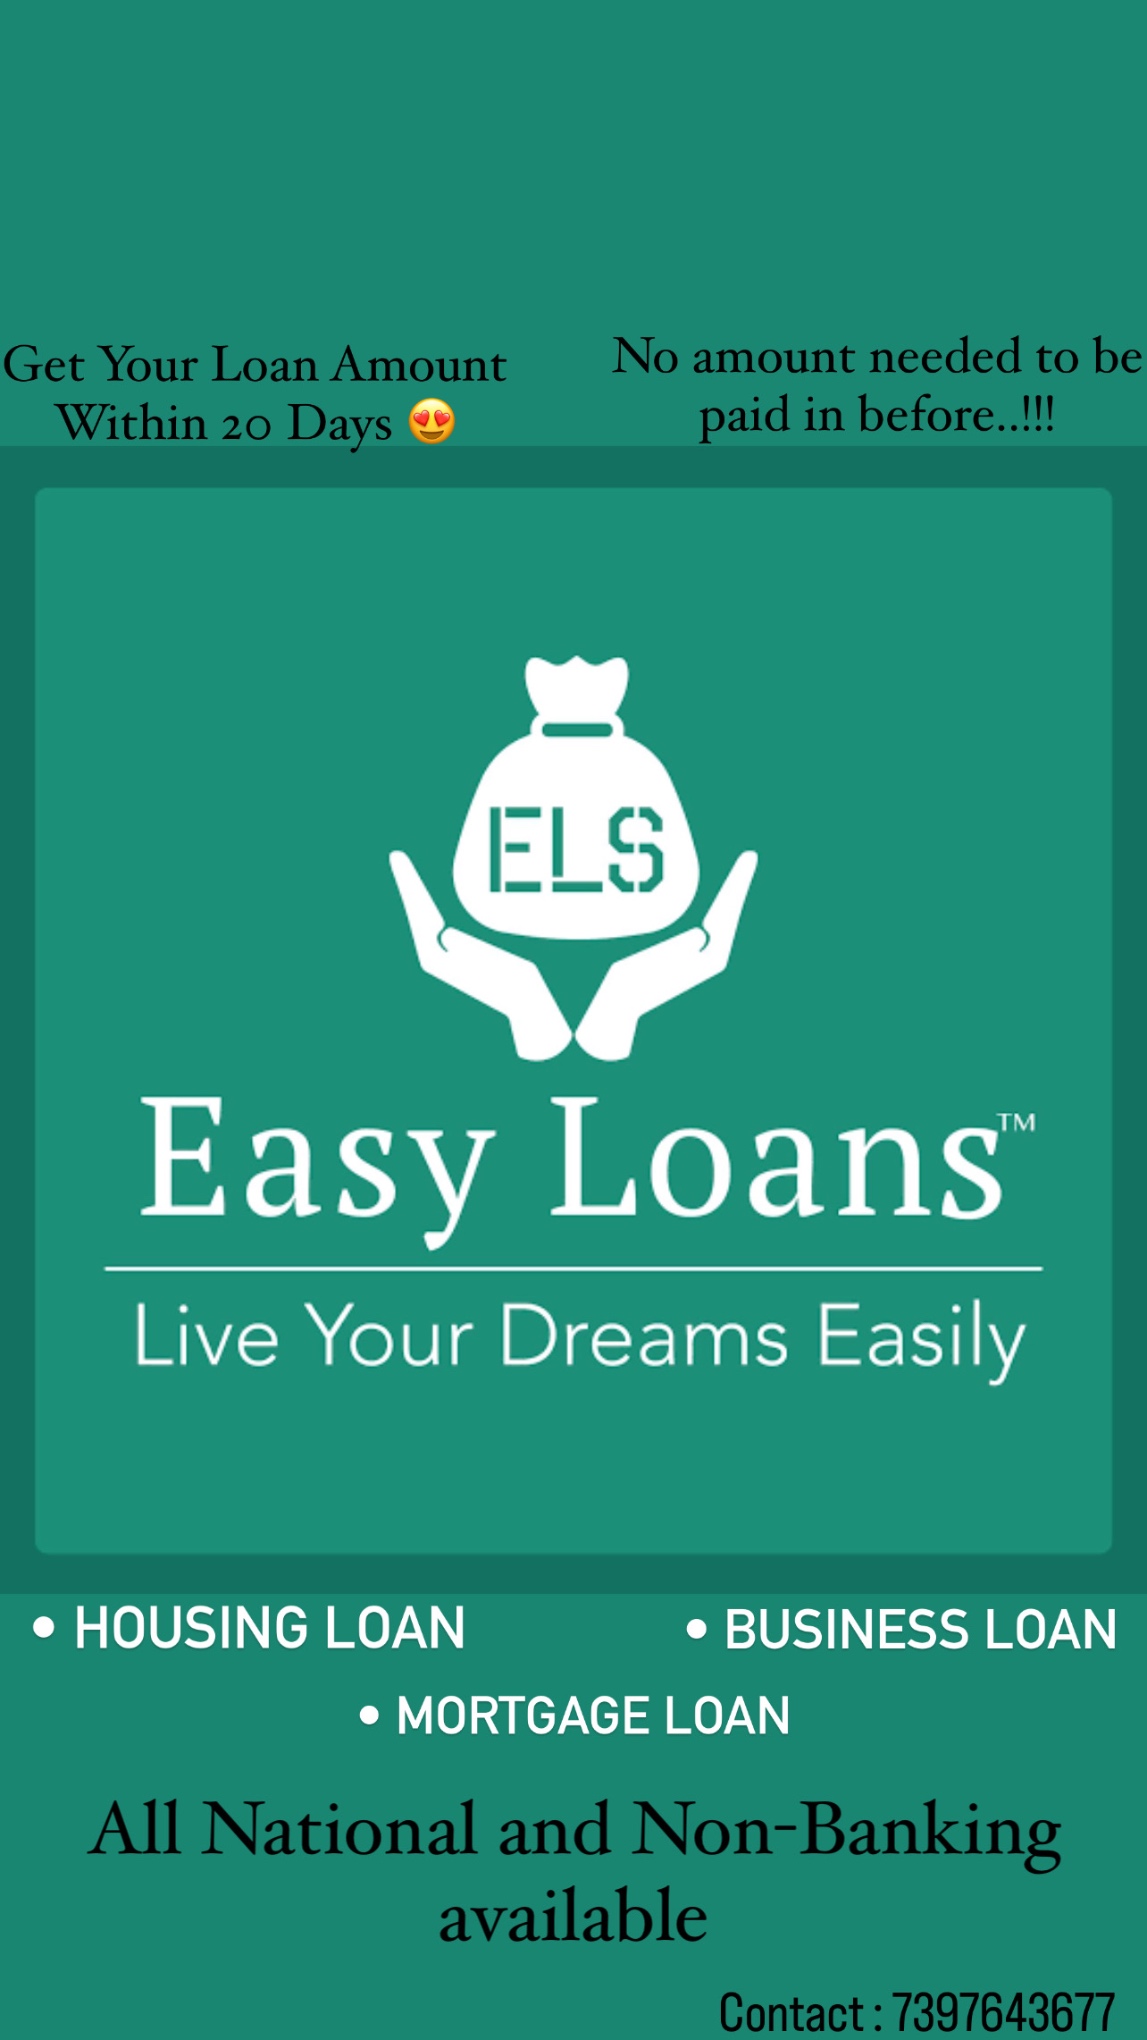 Avail your dream LOAN